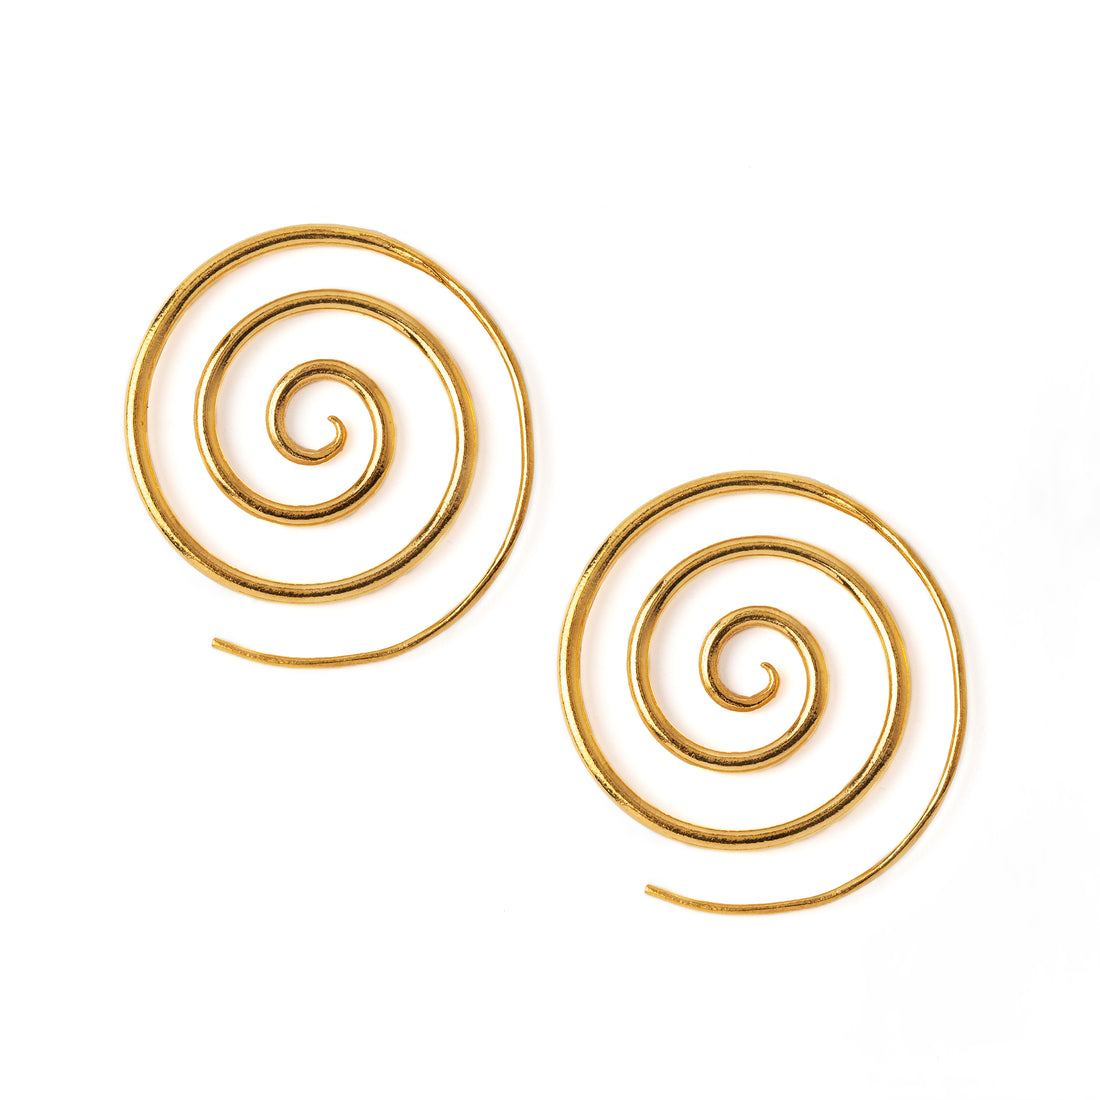 Super Spiral Gold Earrings frontal view